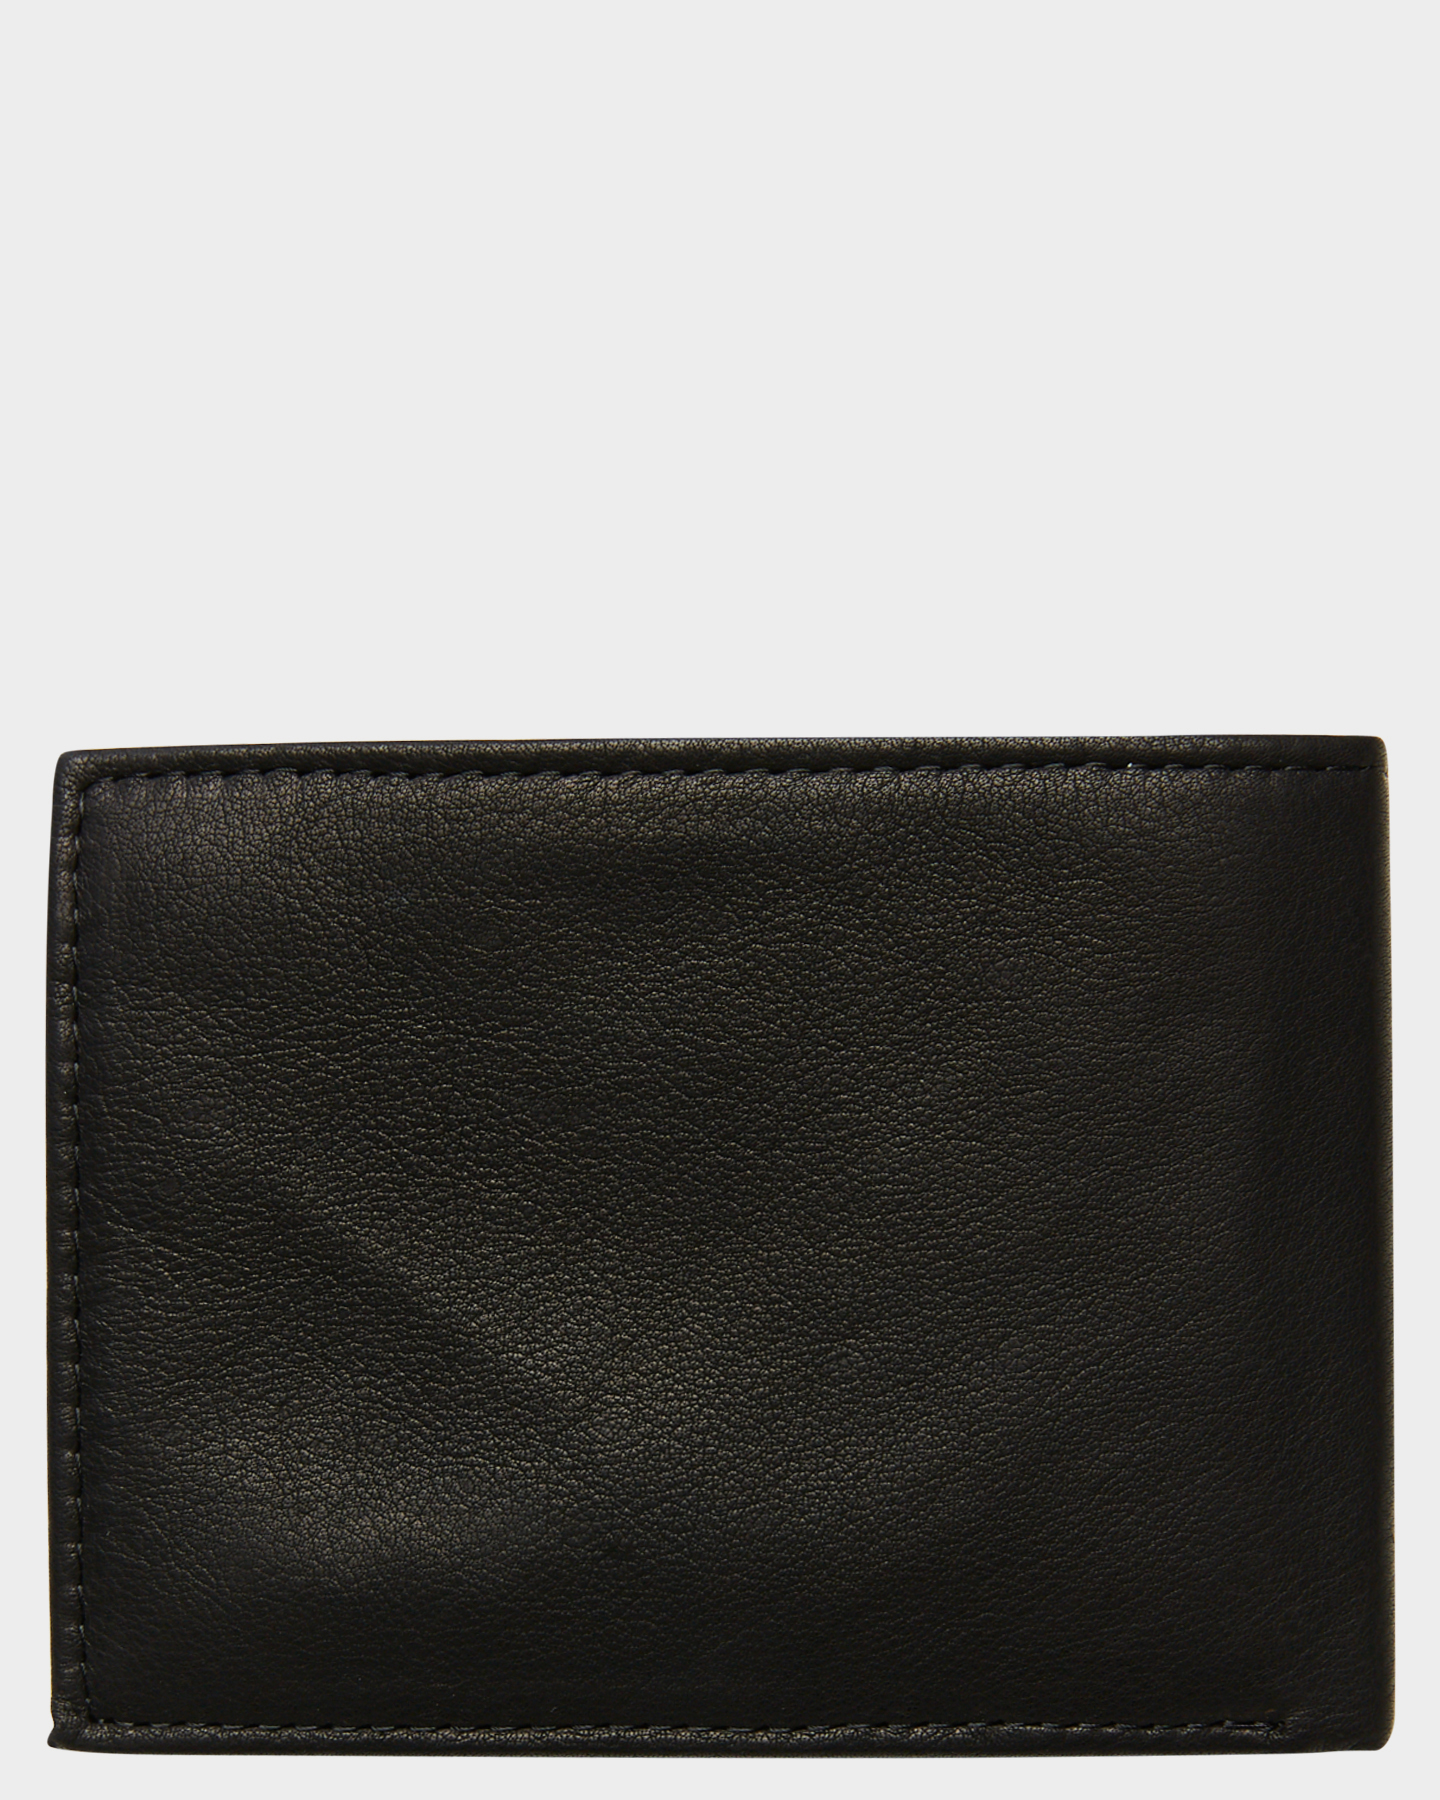 Rip Curl K Roo Rfid All Day Leather Wallet - Black | SurfStitch